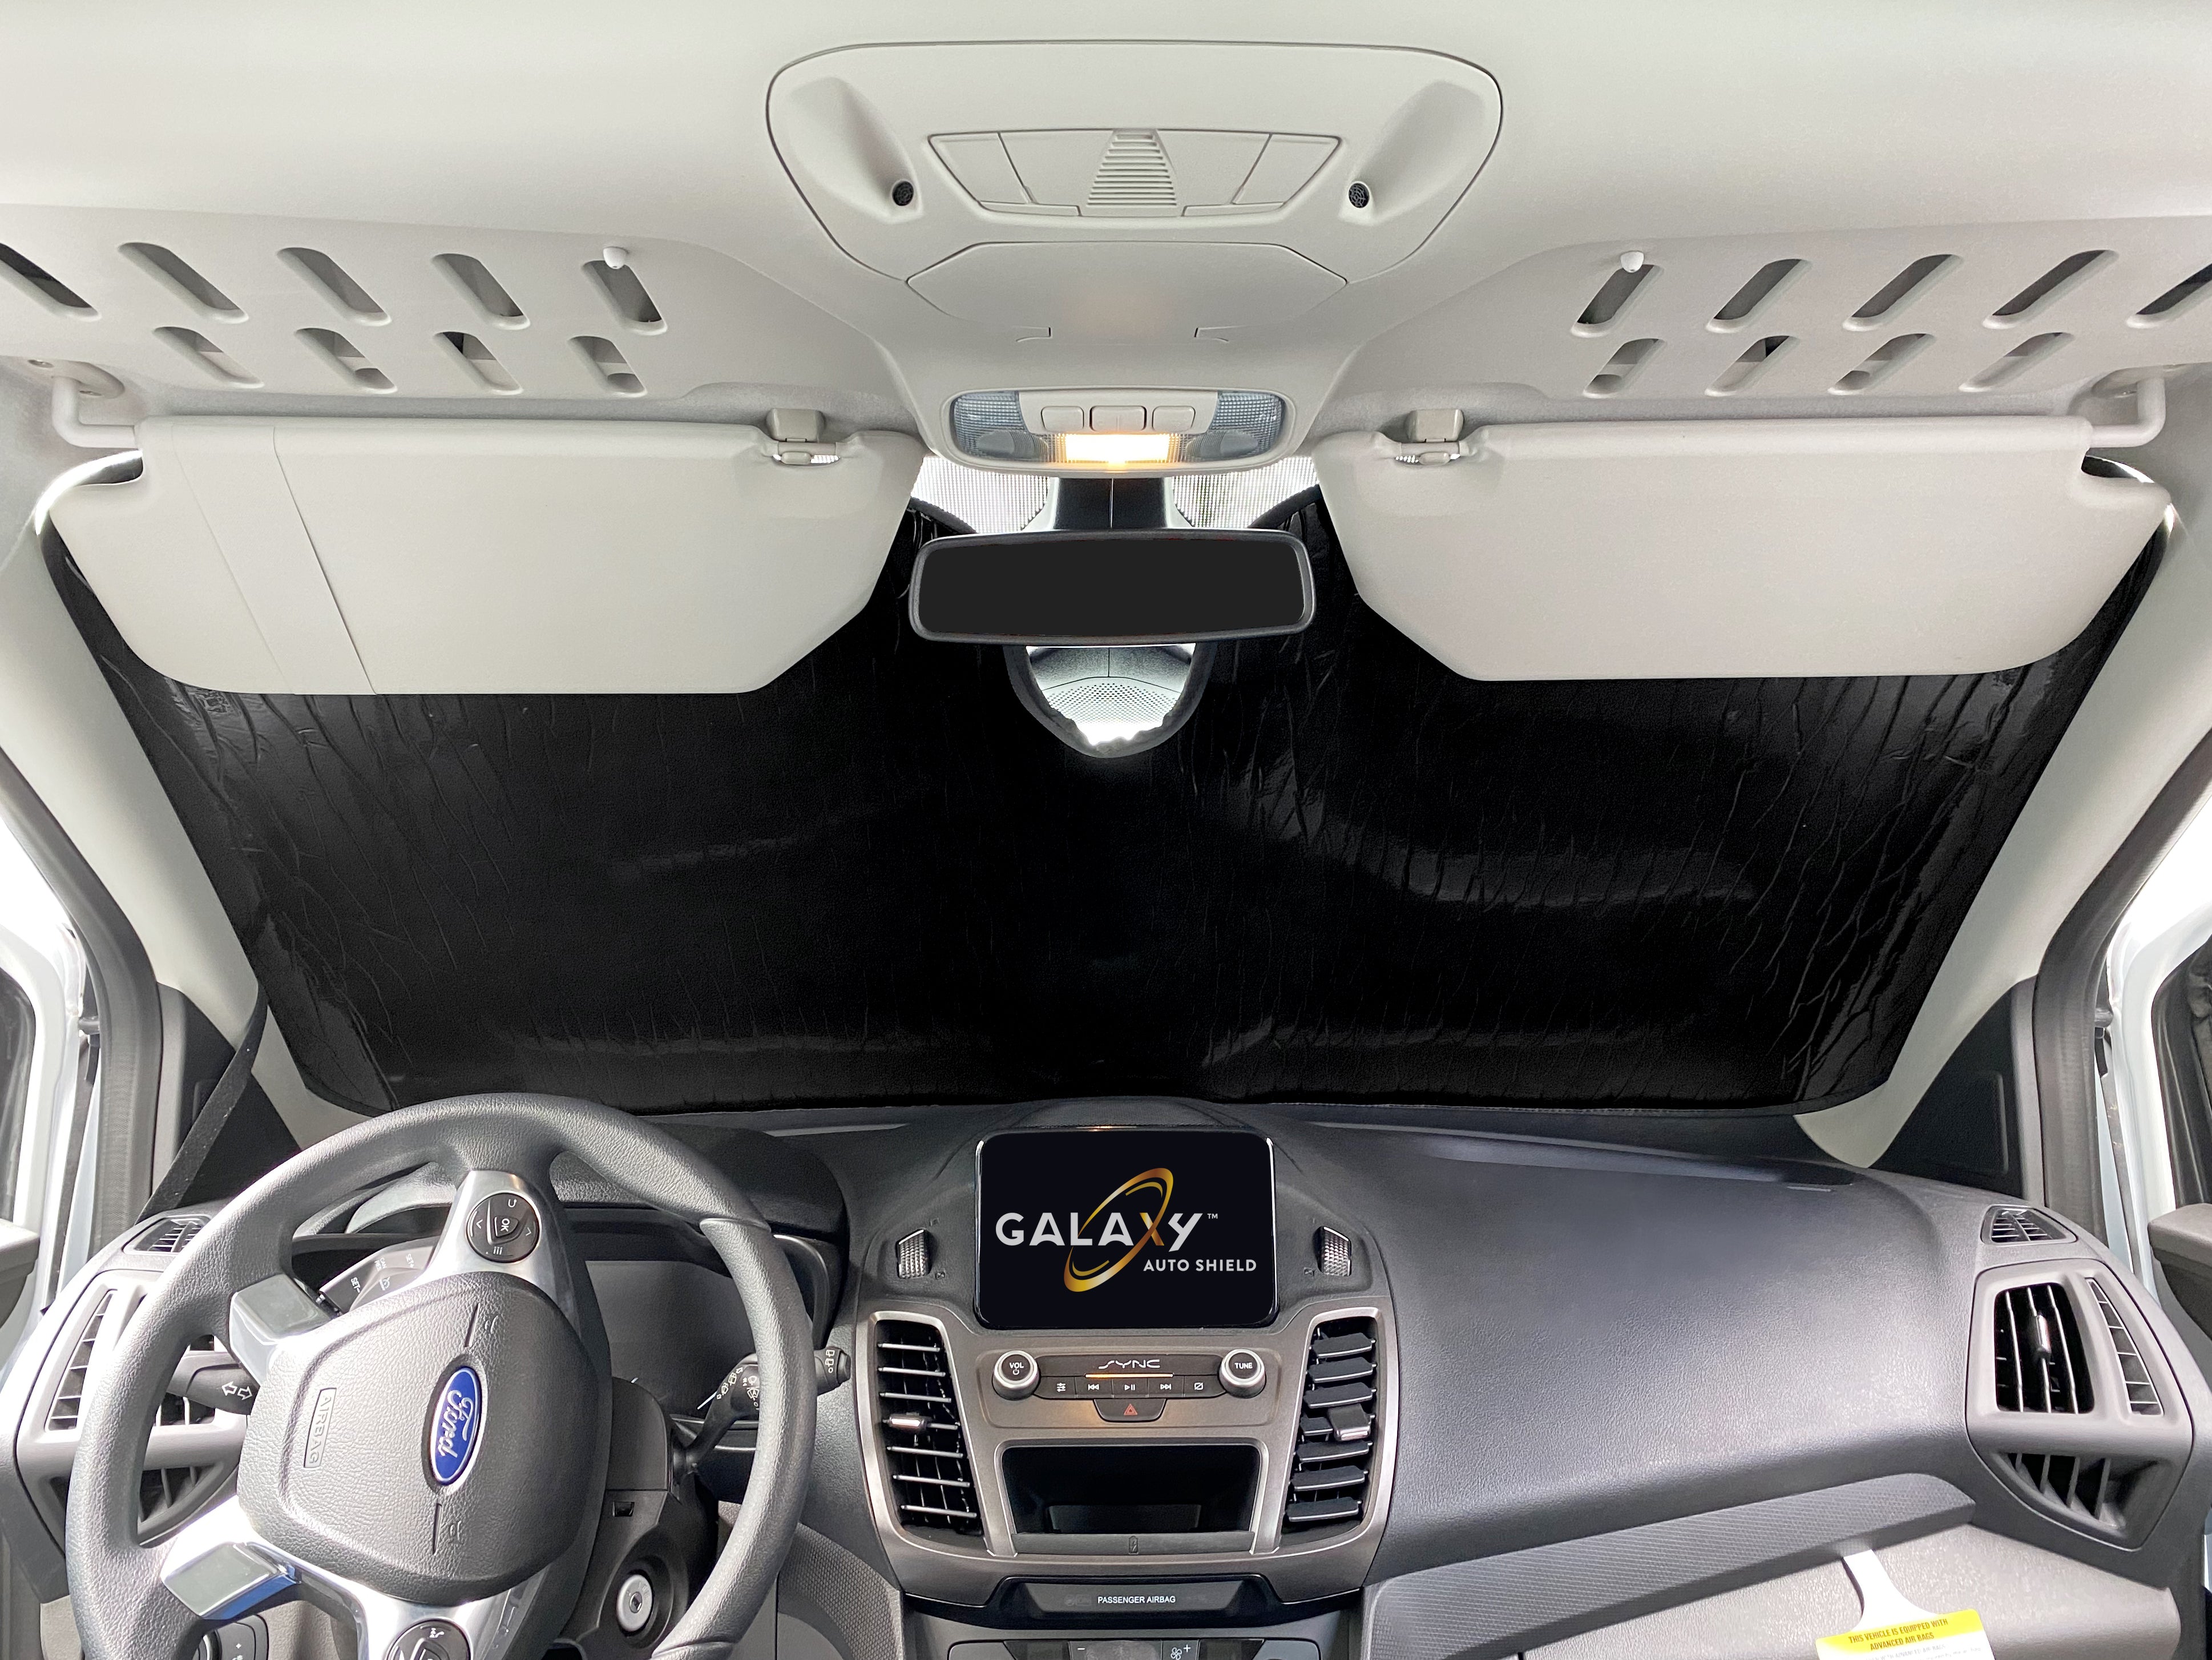 Sunshades for 2014-2023 Ford Transit Connect Minivan (NOT for full-sized Transit) (View for more options)